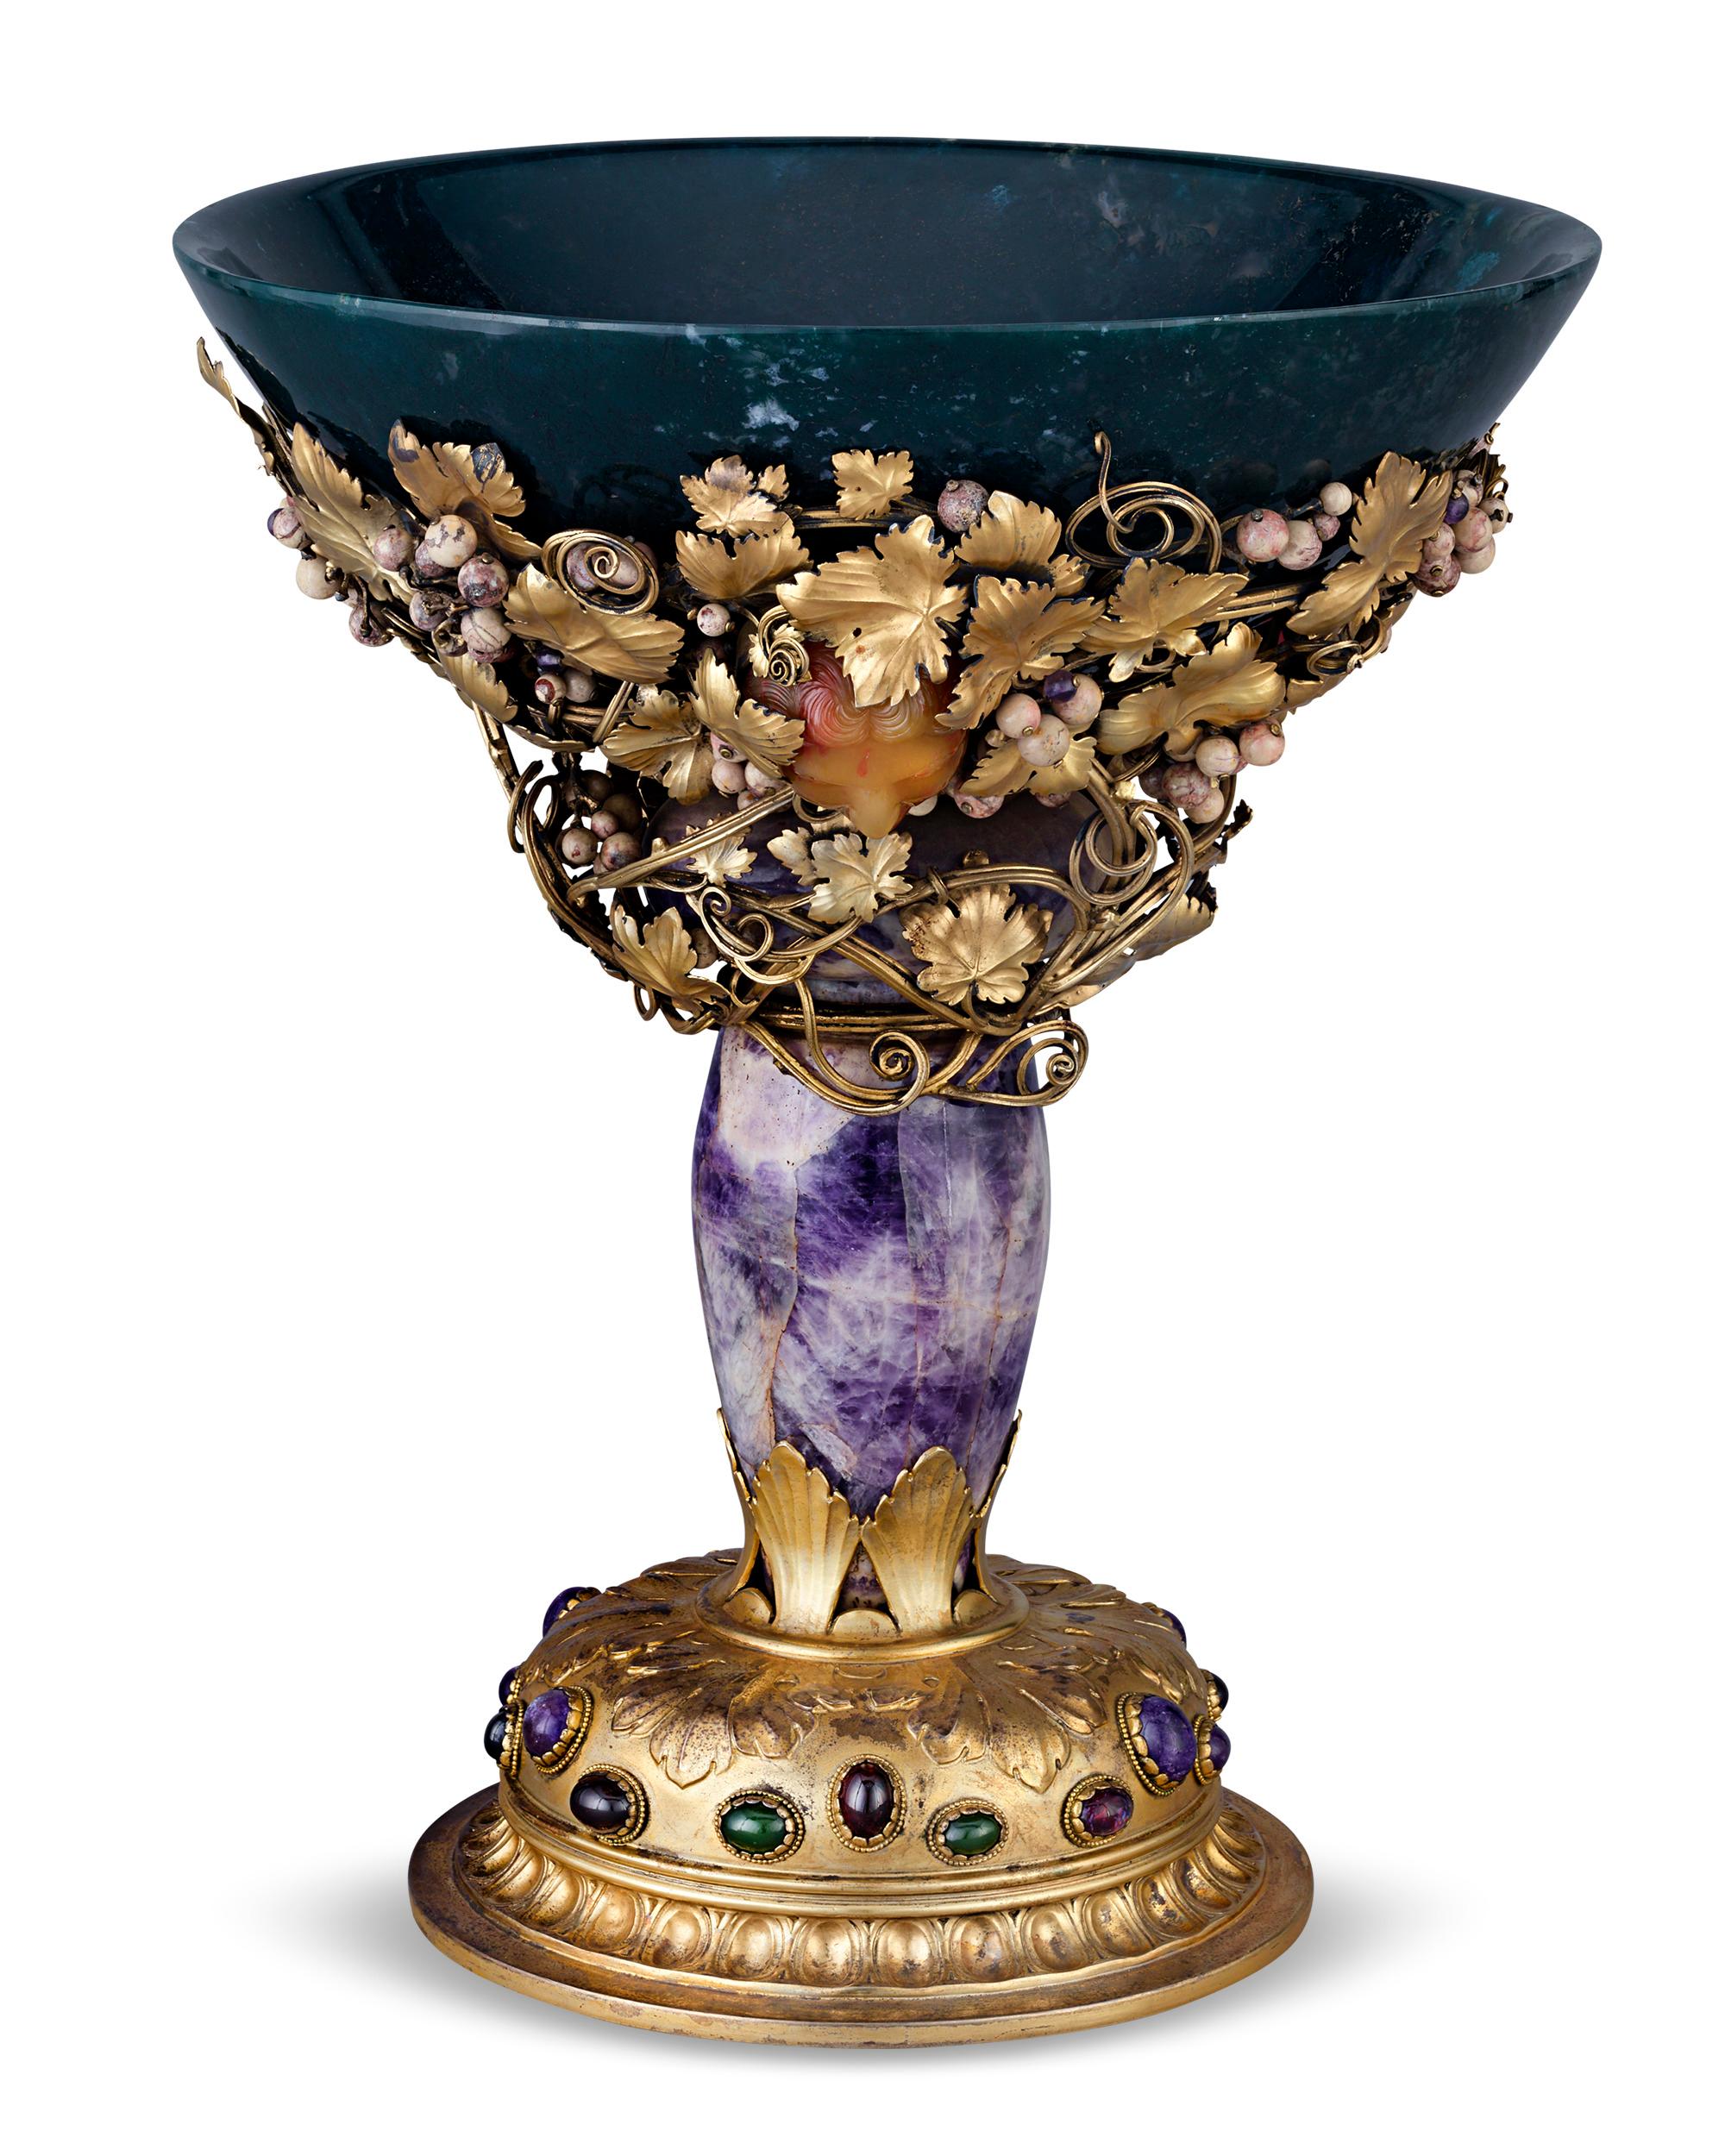 This unique Italian hardstone centerpiece is a luxurious example of the Renaissance Revival style. The design is formed primarily from semiprecious stones — its bowl is carved from a lovely example of moss agate, while a large specimen of amethyst